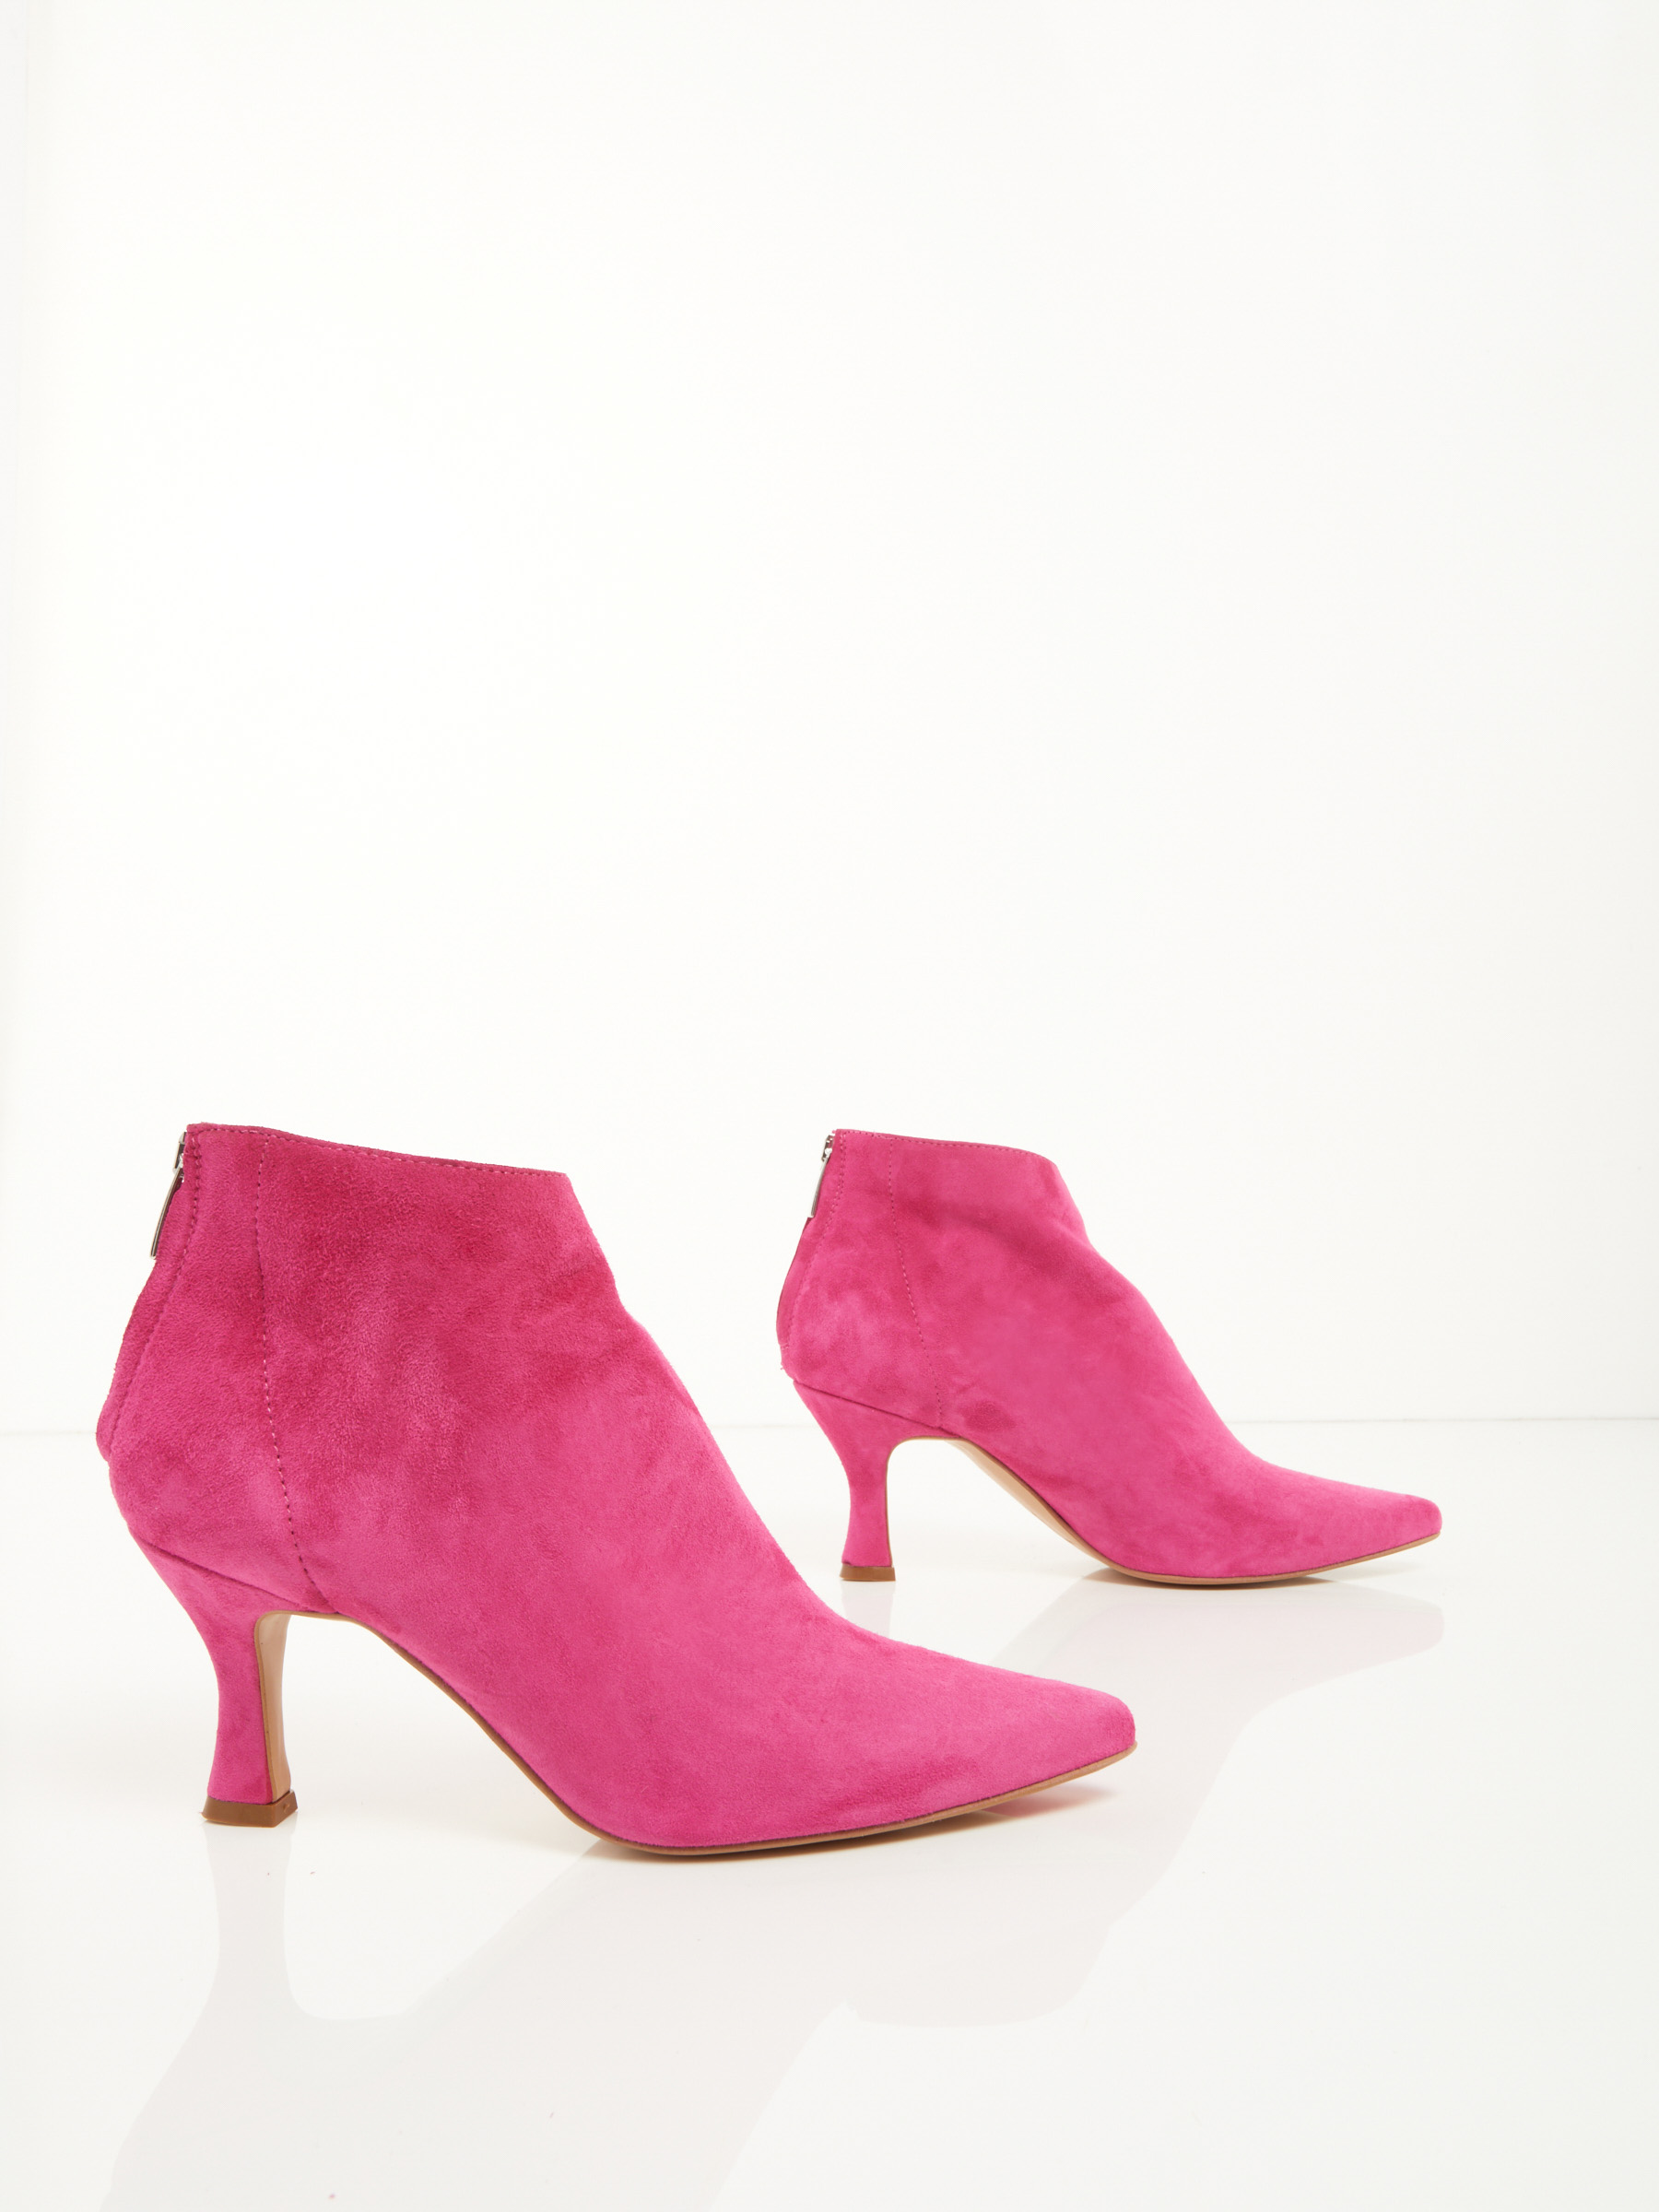 Suede Ankle Boots F0545554-0413 scarpe ovye